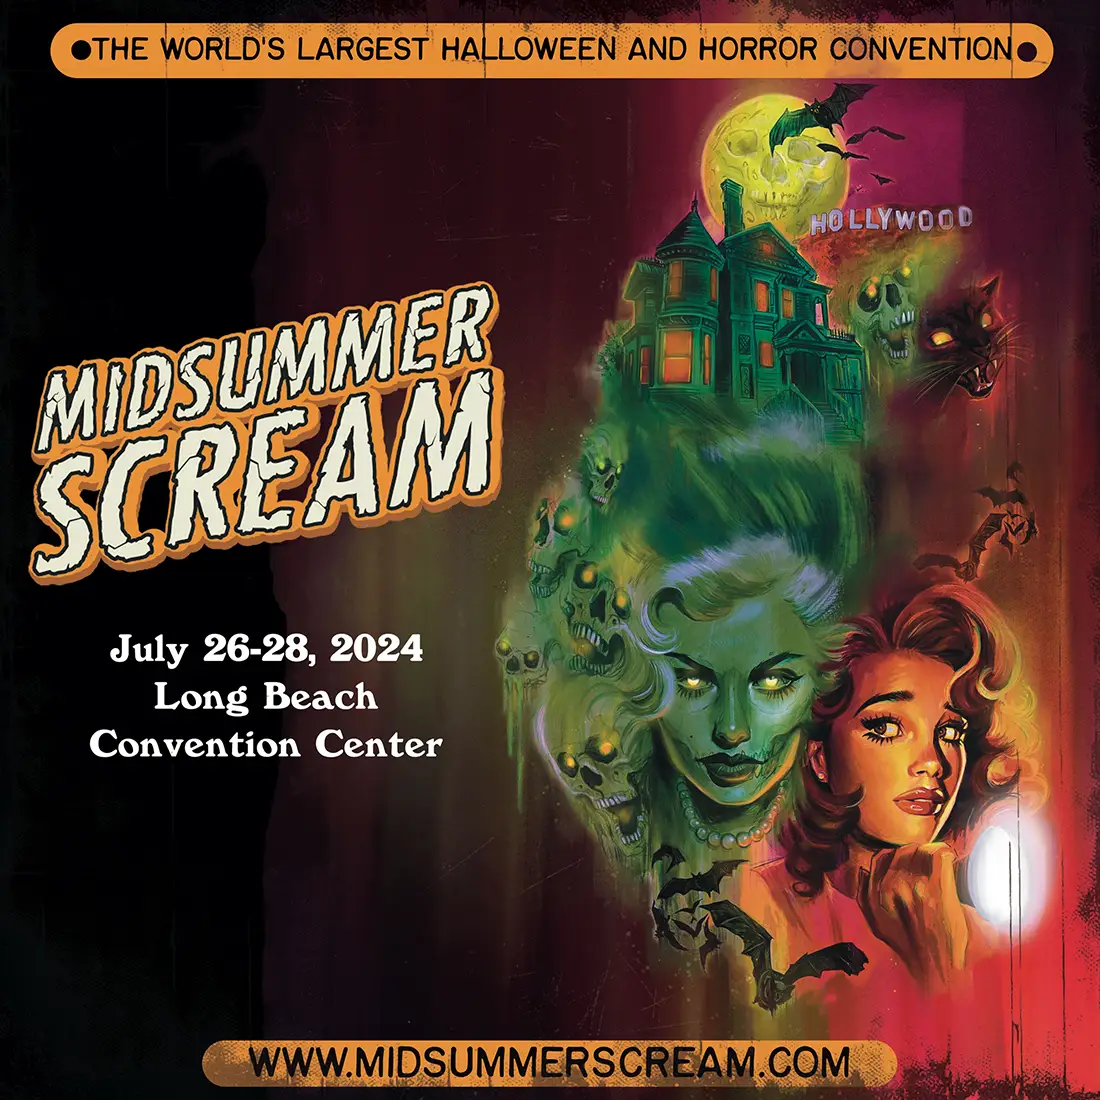 MIDSUMMER SCREAM IS EXPECTING RECORD ATTENDANCE